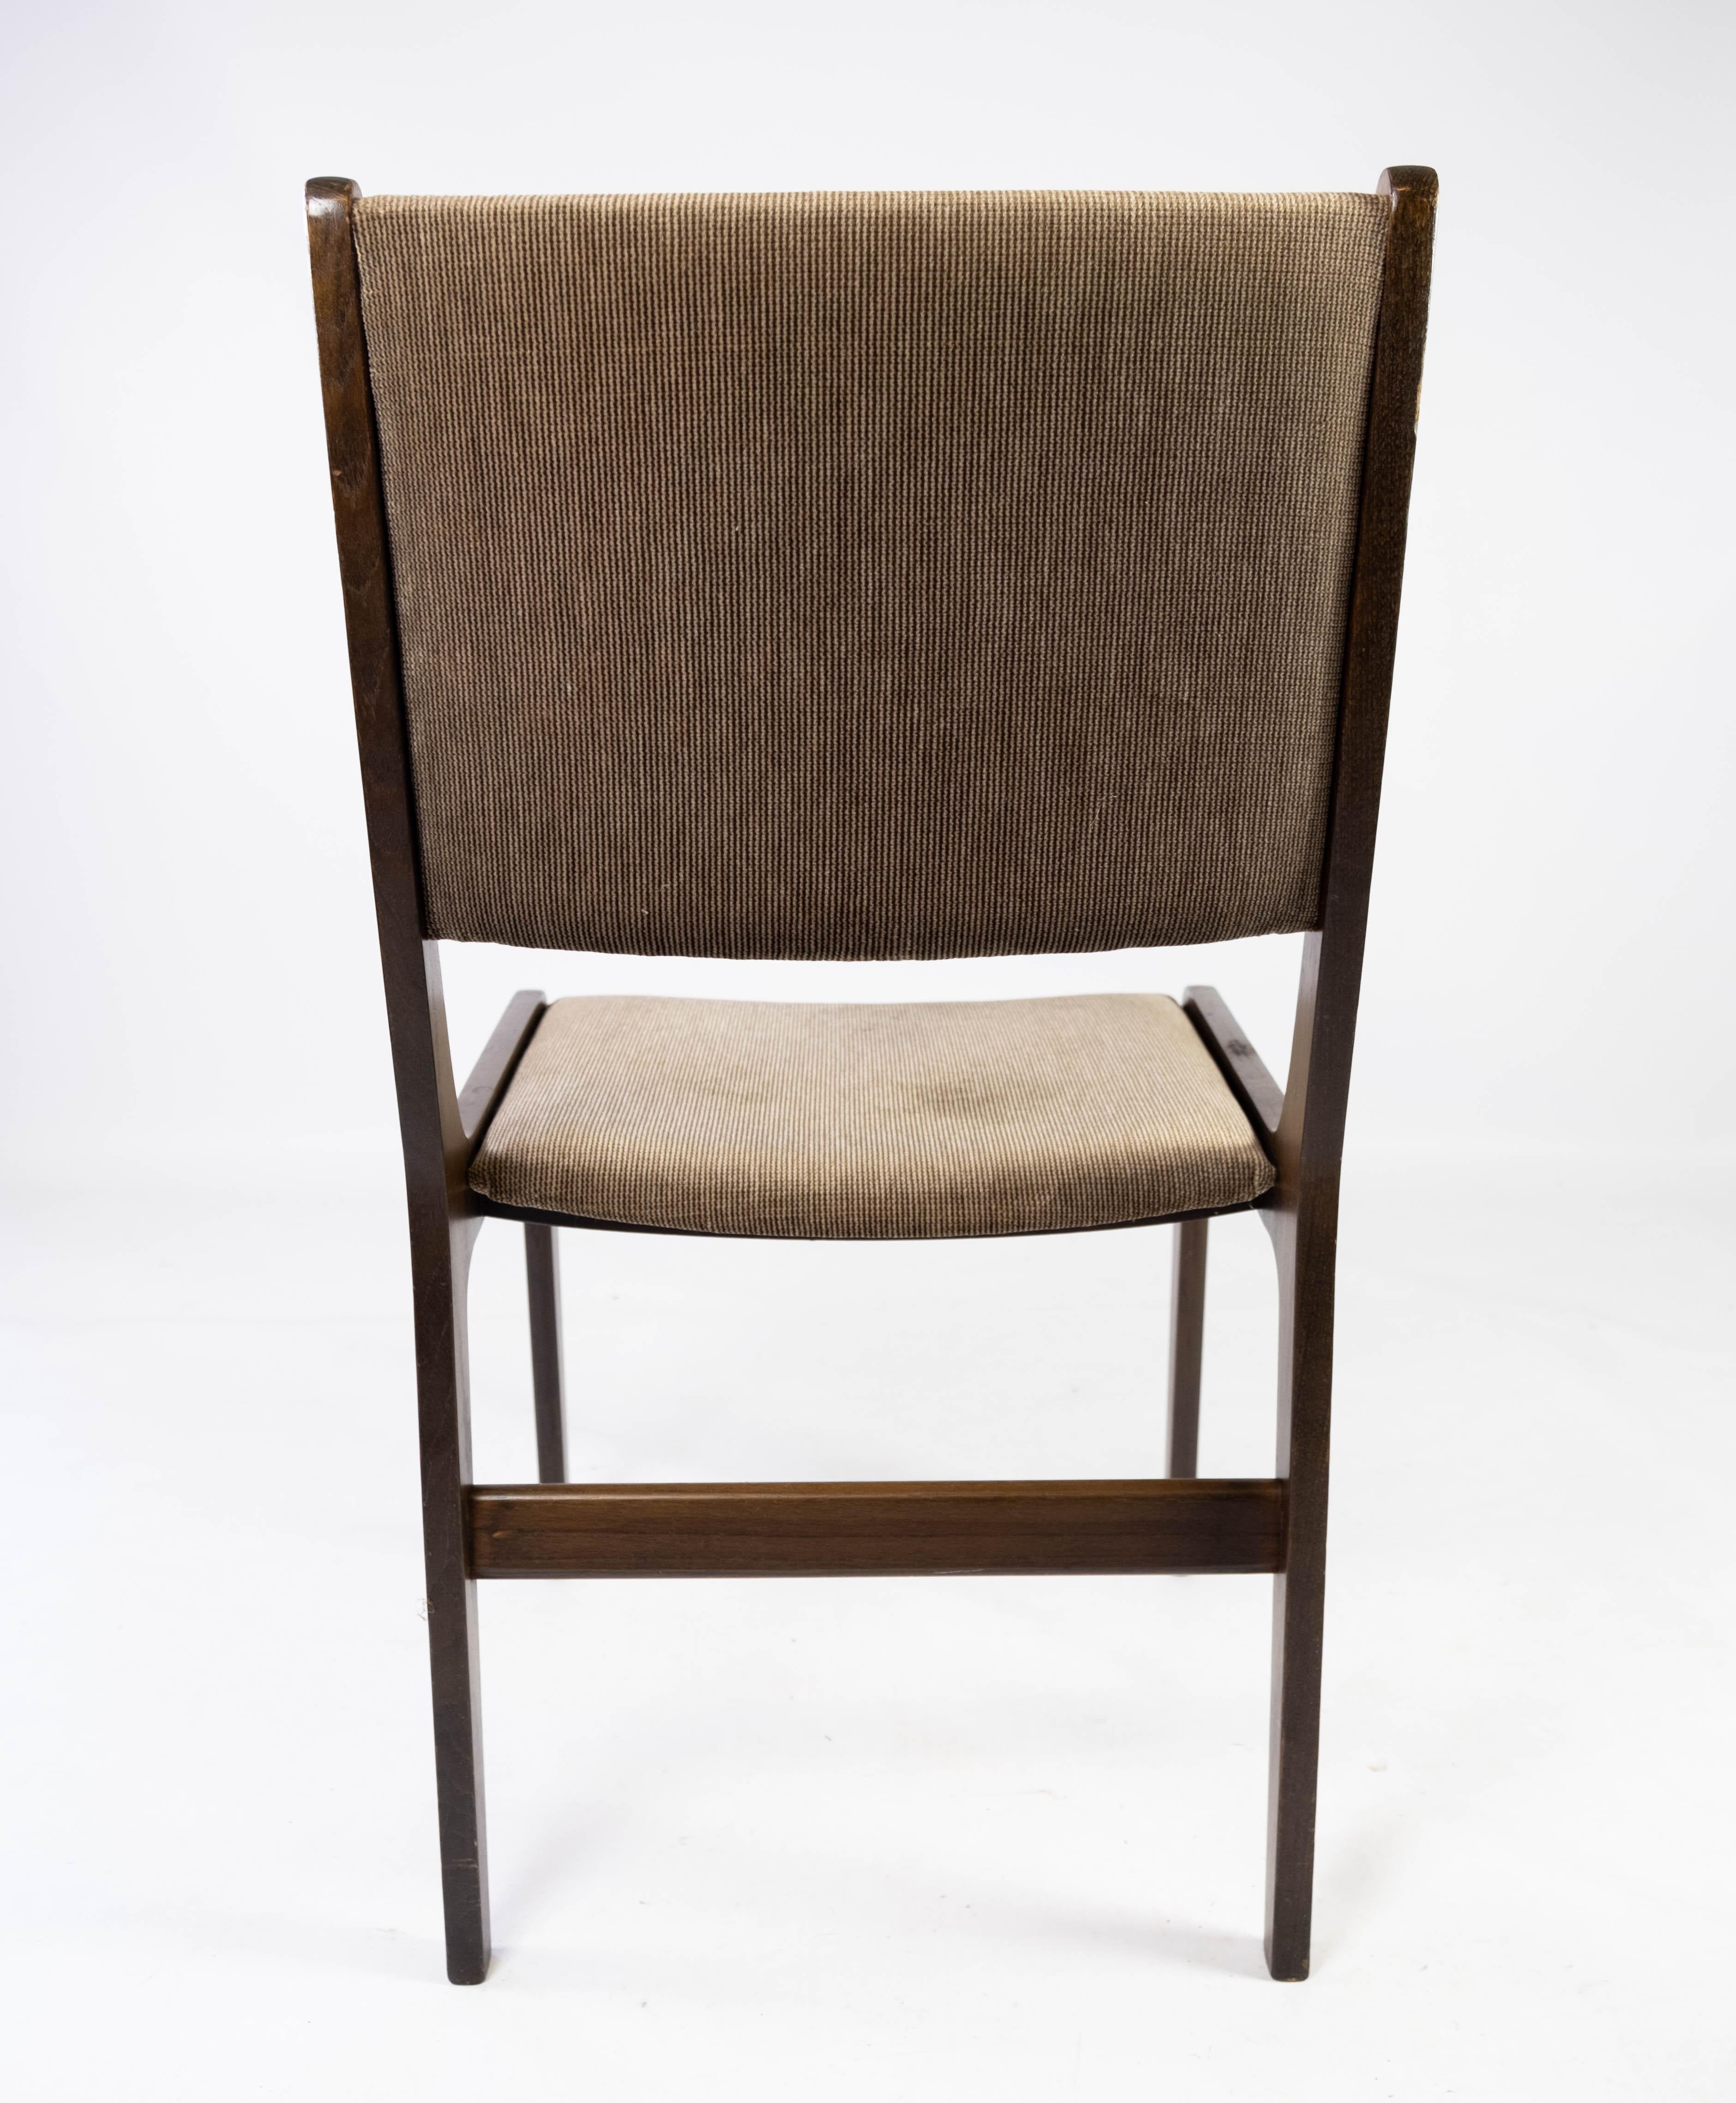 Set of Four Dining Room Chairs in Dark Wood of Danish Design by Faarstrup, 1960s For Sale 5